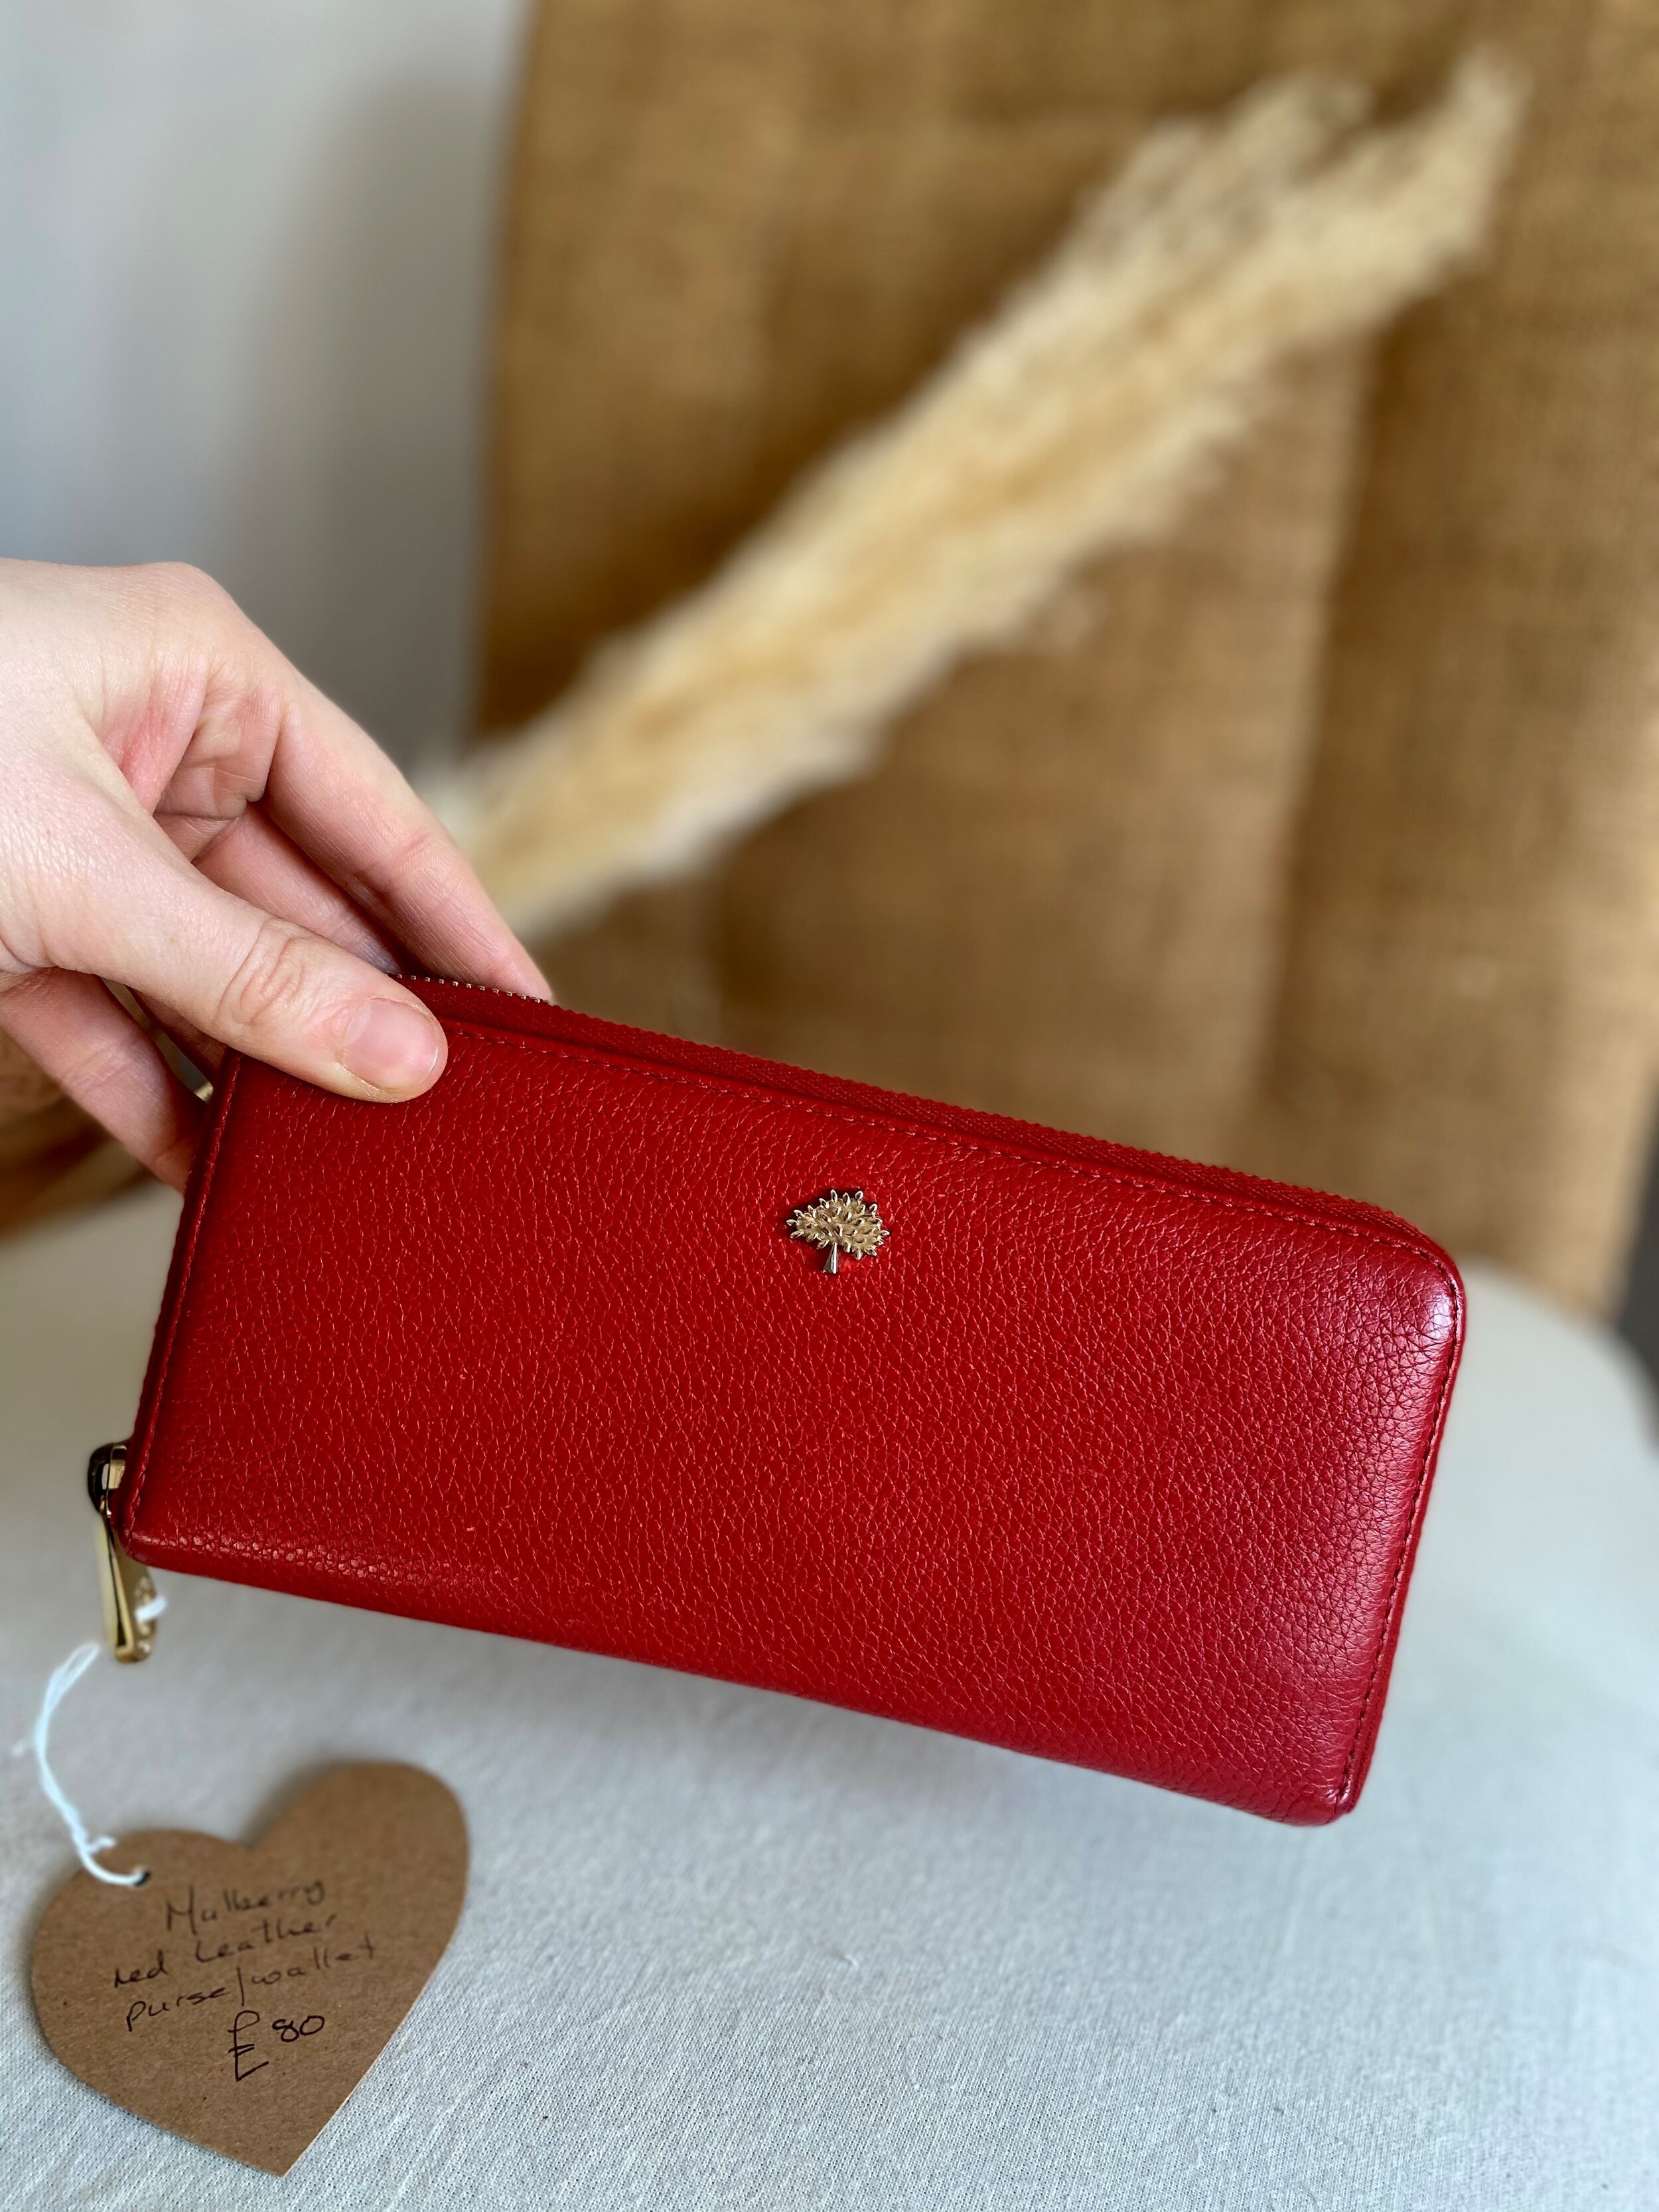 Make Peace with Yourself :): [Mulberry] Tree French Purse Review  (Small/Classic) (One Month Review)